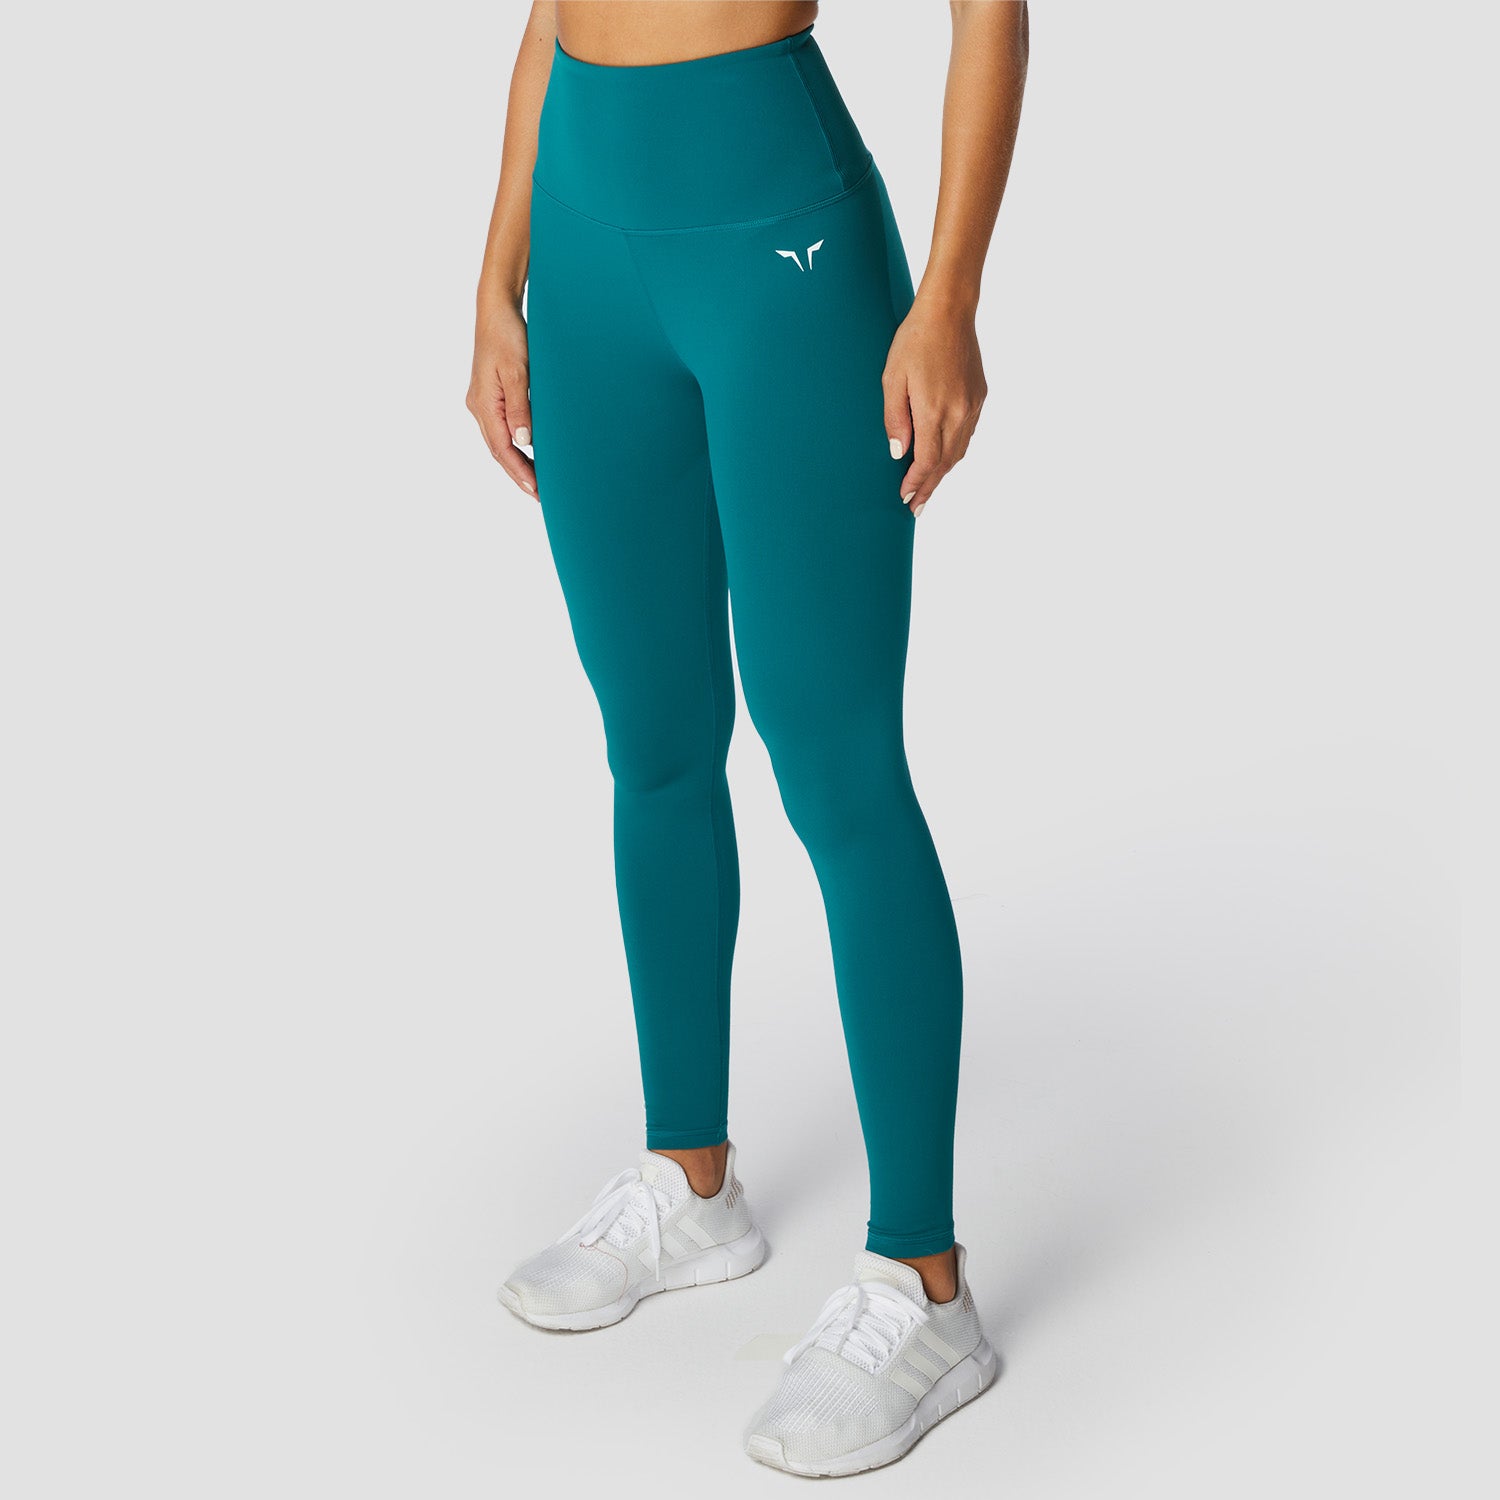 Turquoise Leggings, High Waisted, Squat-Proof